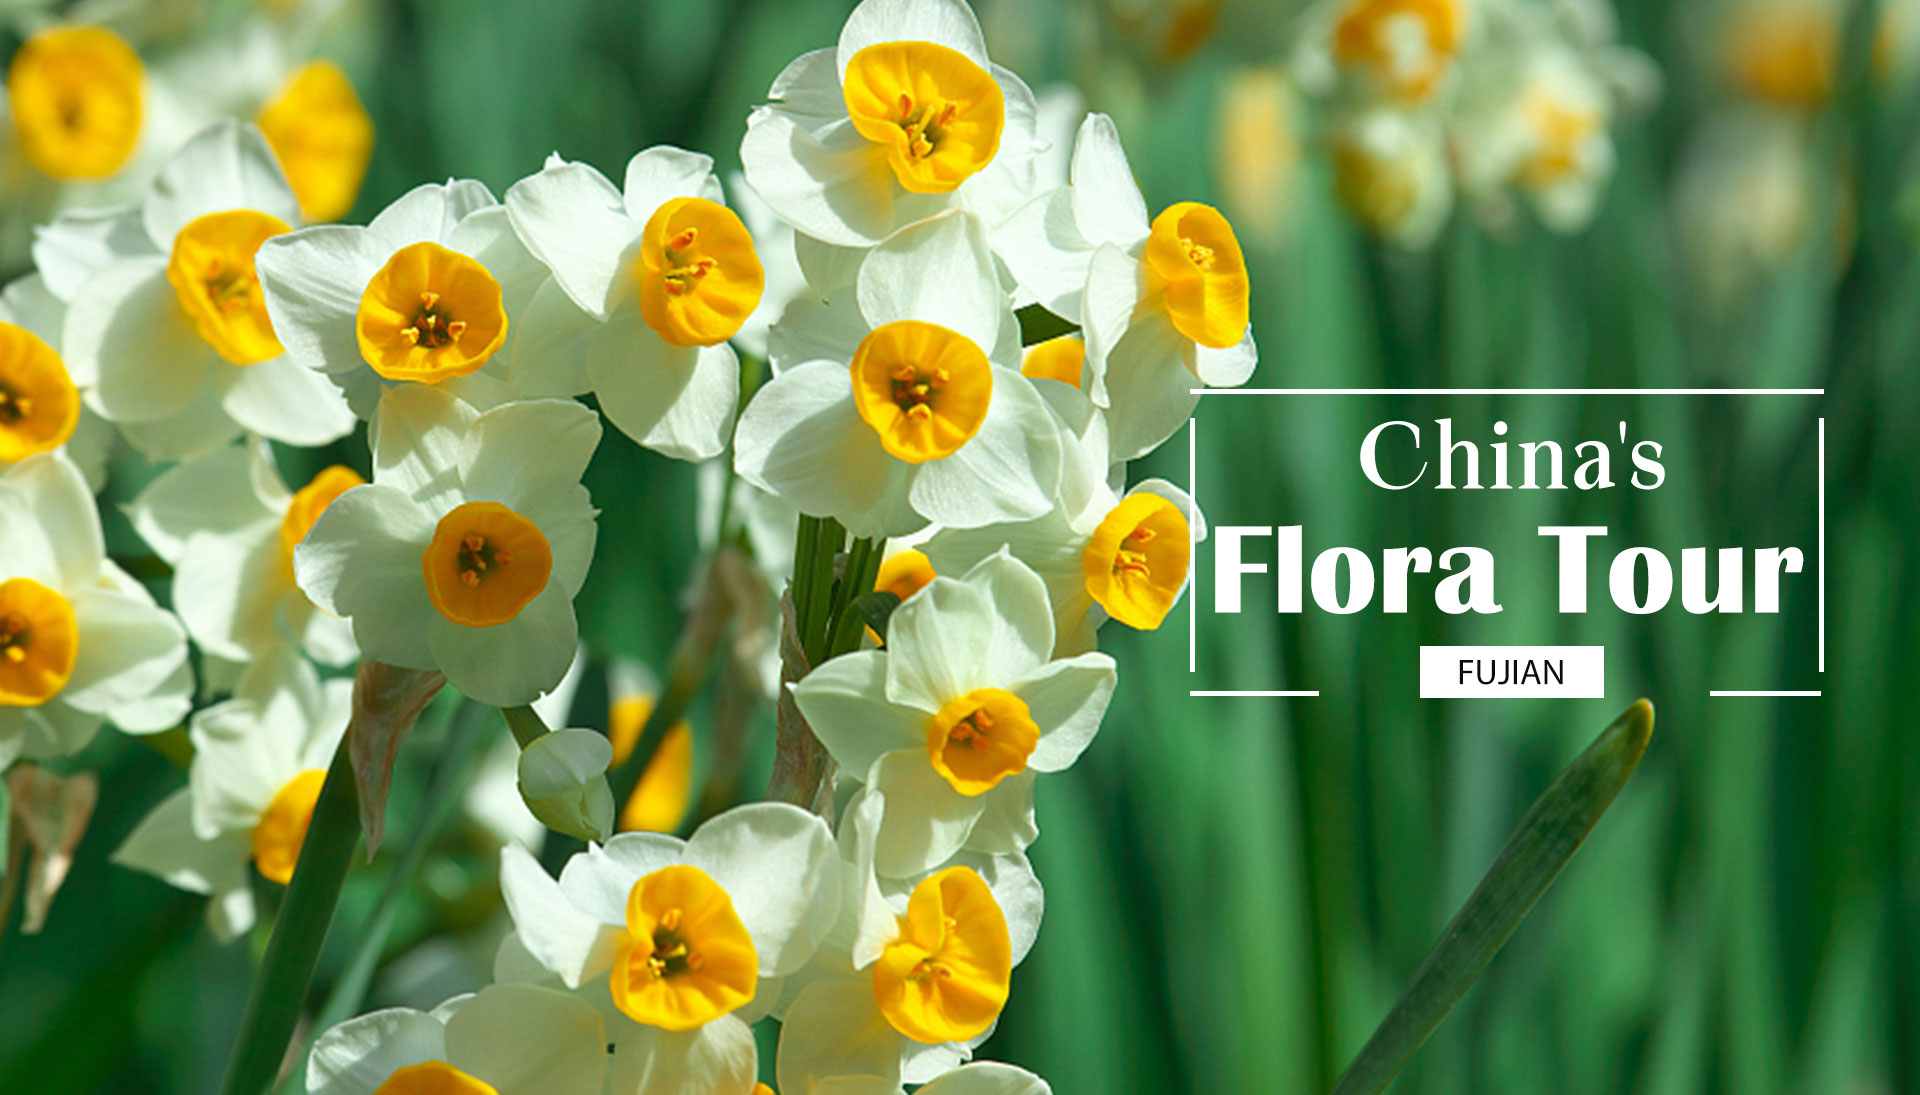 China's Flora Tour: Narcissus – a flower full of myths